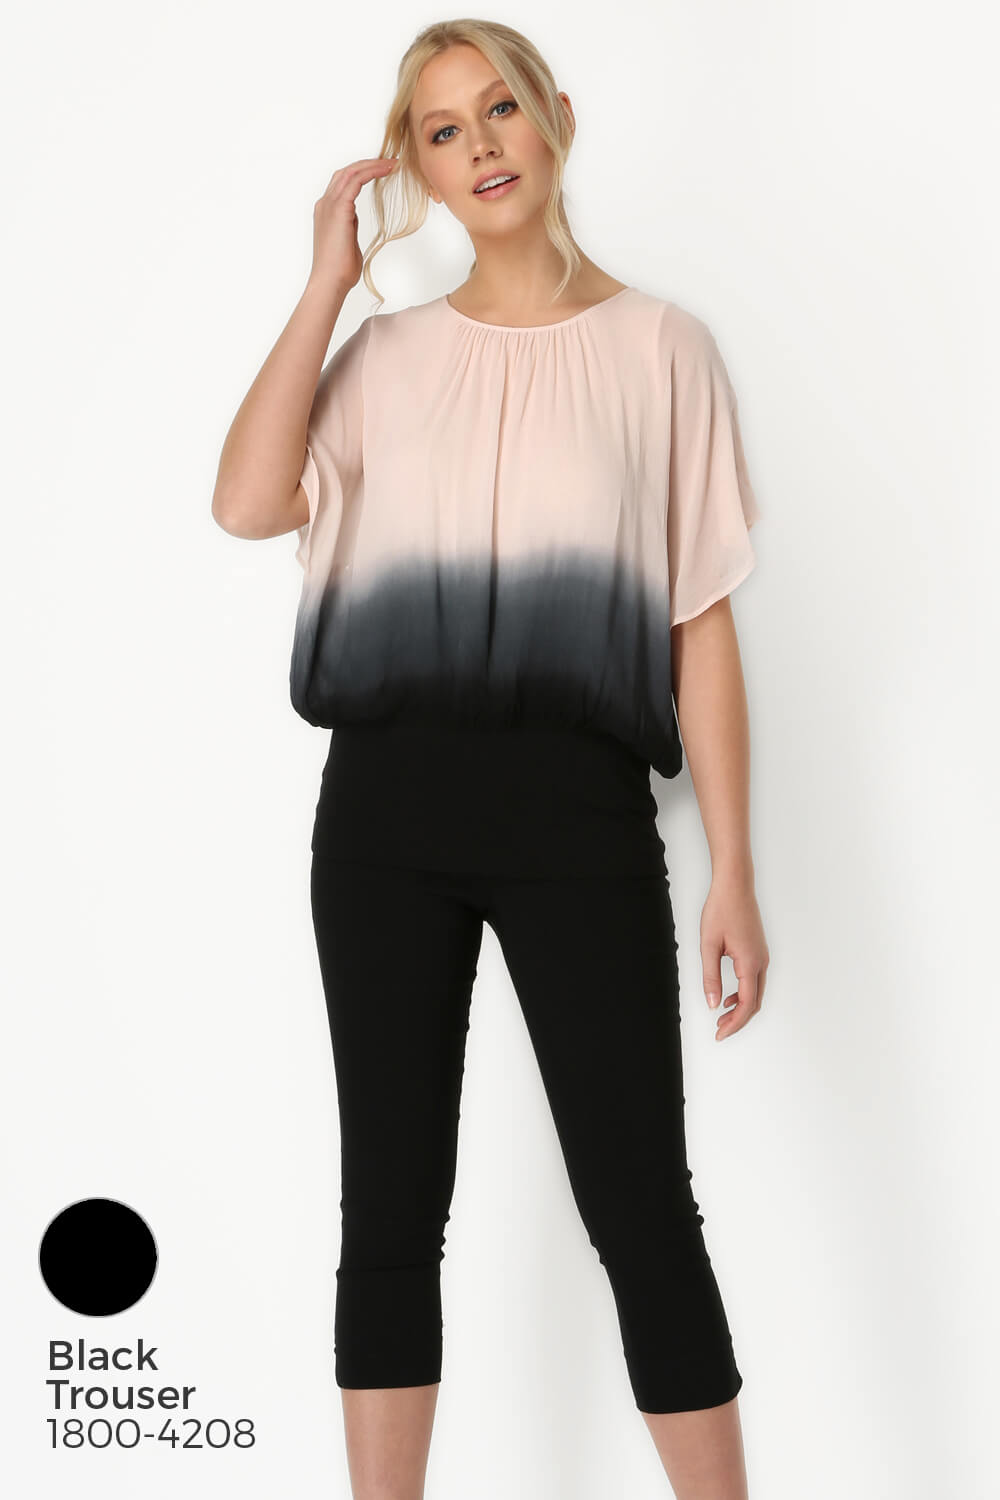 PINK Ombre Batwing Top, Image 5 of 8